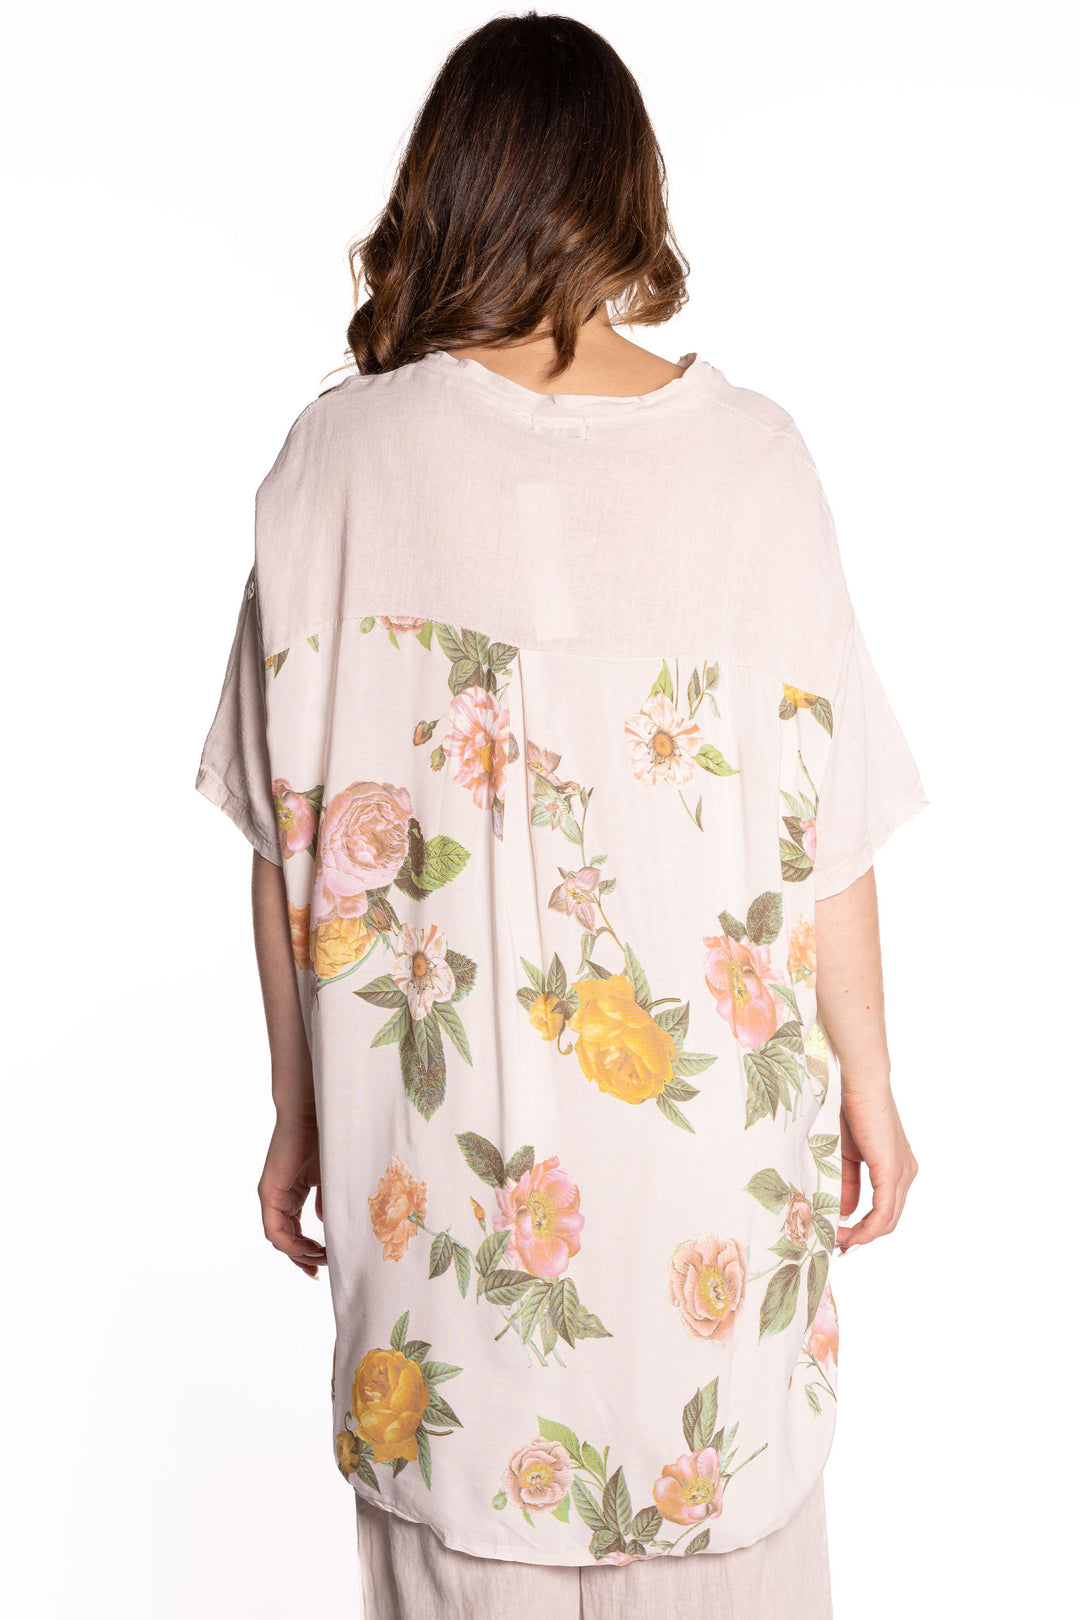 Etern Spring 2023 women's casual high-low linen blouse with floral printed back - sand back